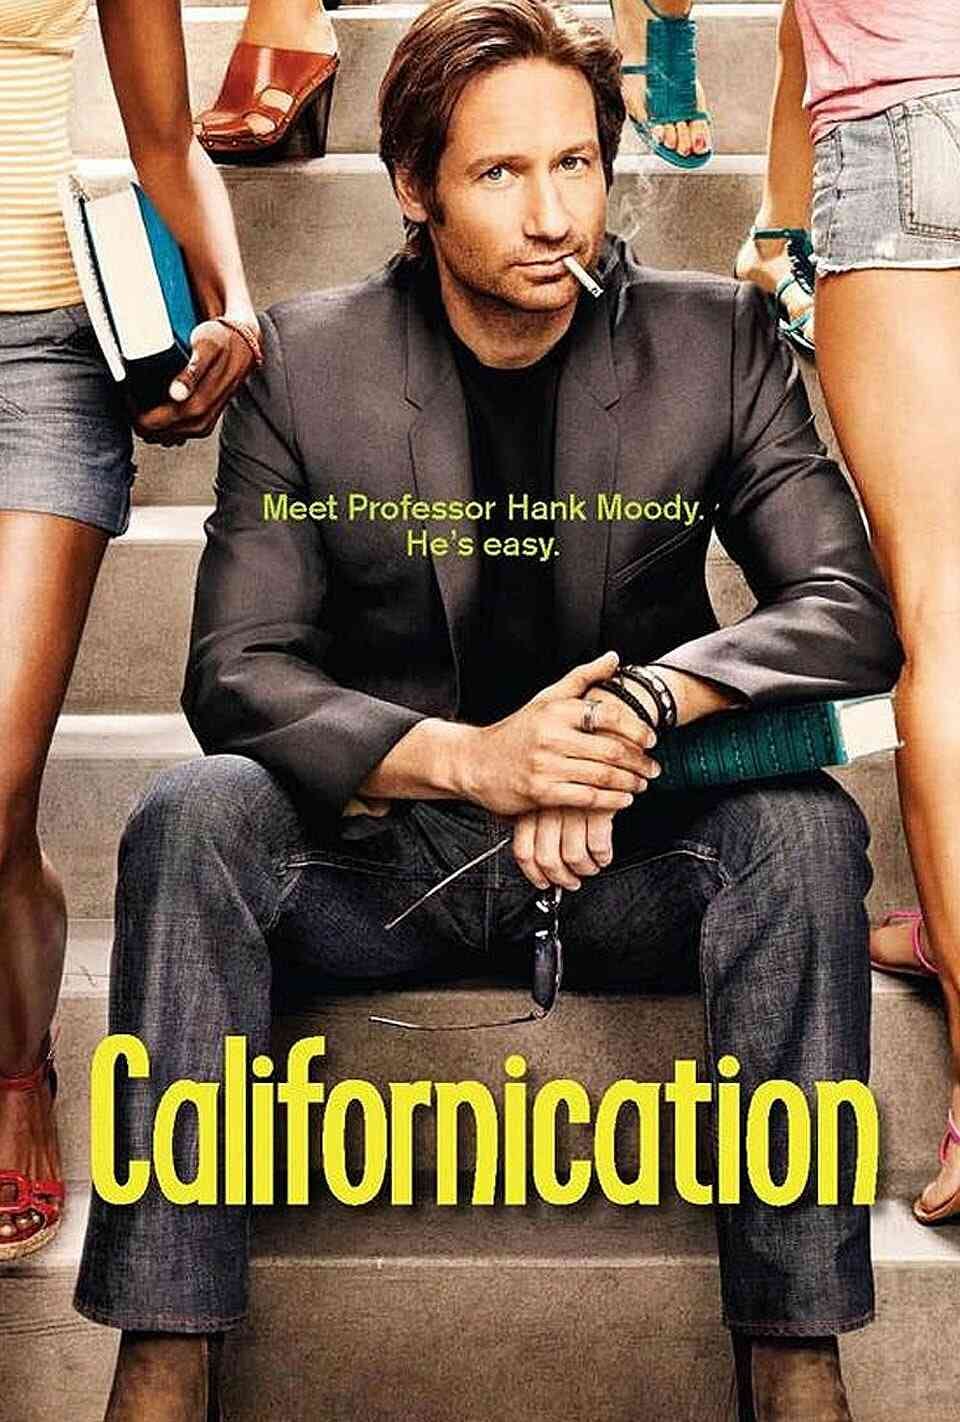 Read Californication screenplay (poster)